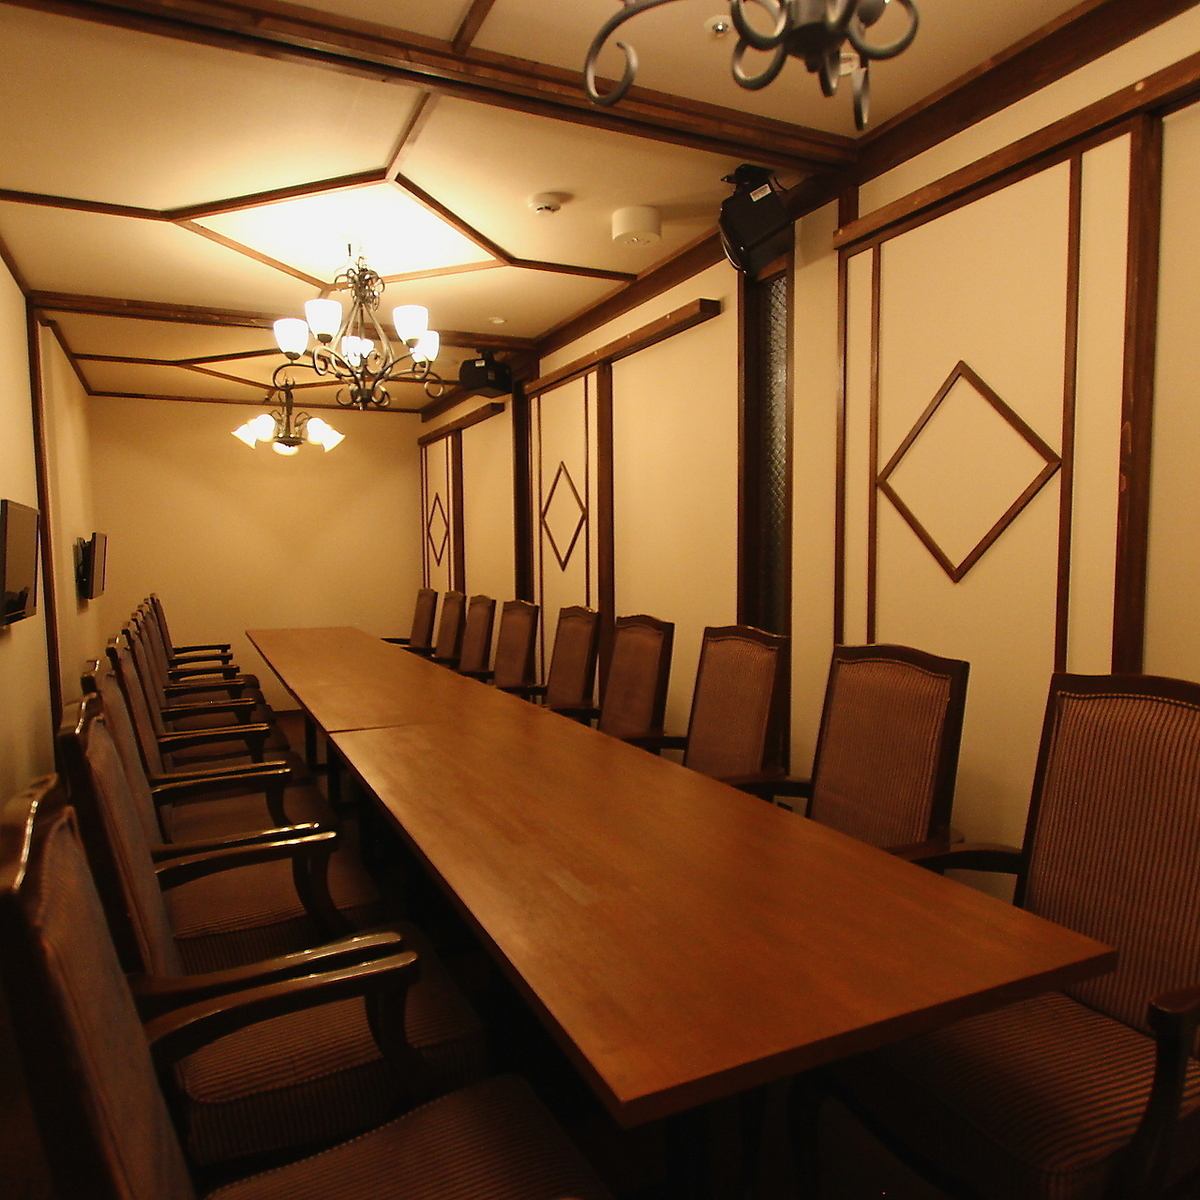 We have complete private room seats that can accommodate up to 12 people.